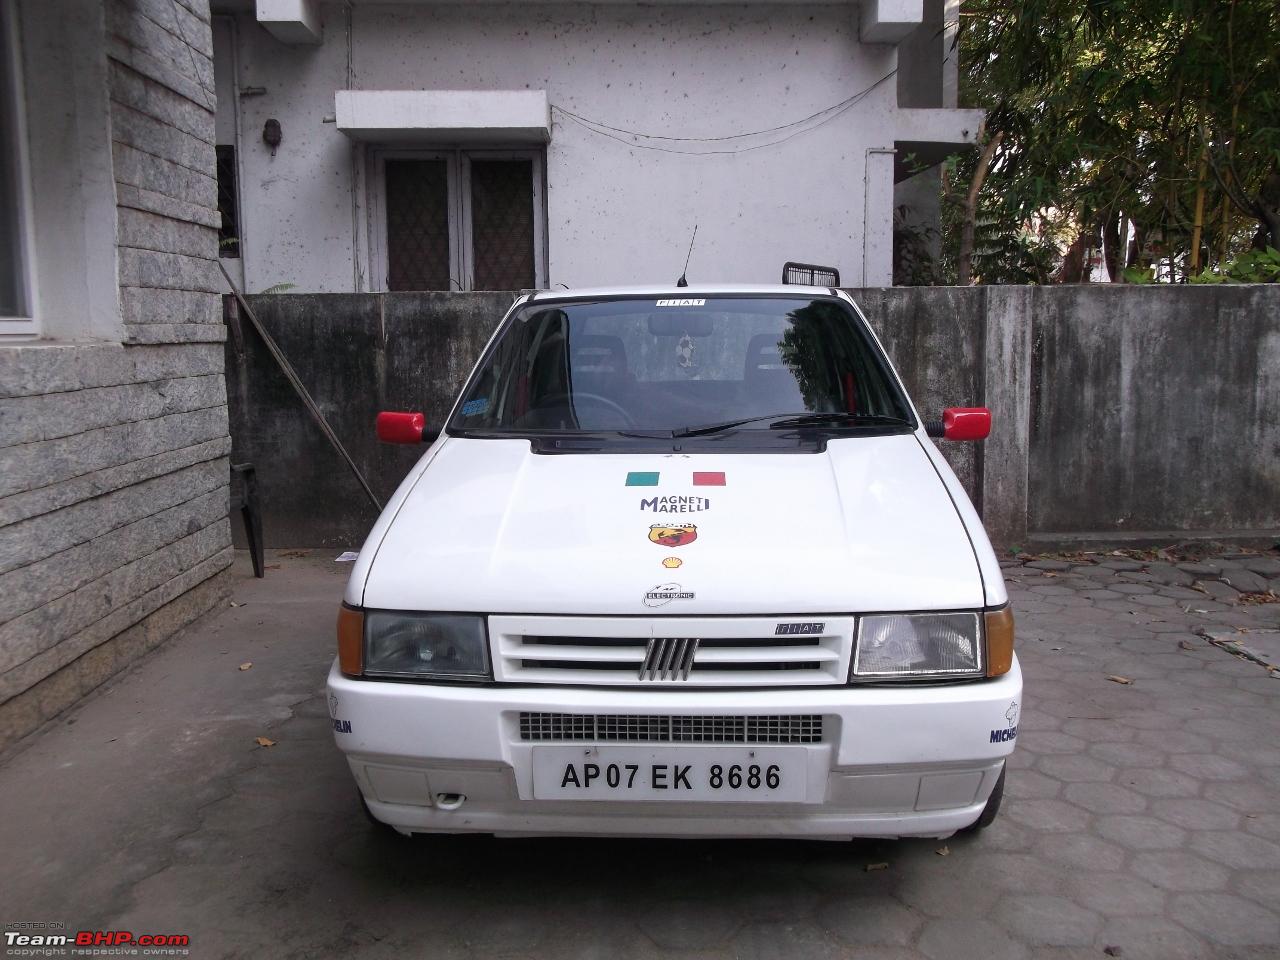 Fiat Uno (1.7 Litre Diesel) // Owner: - Stay Tuned India